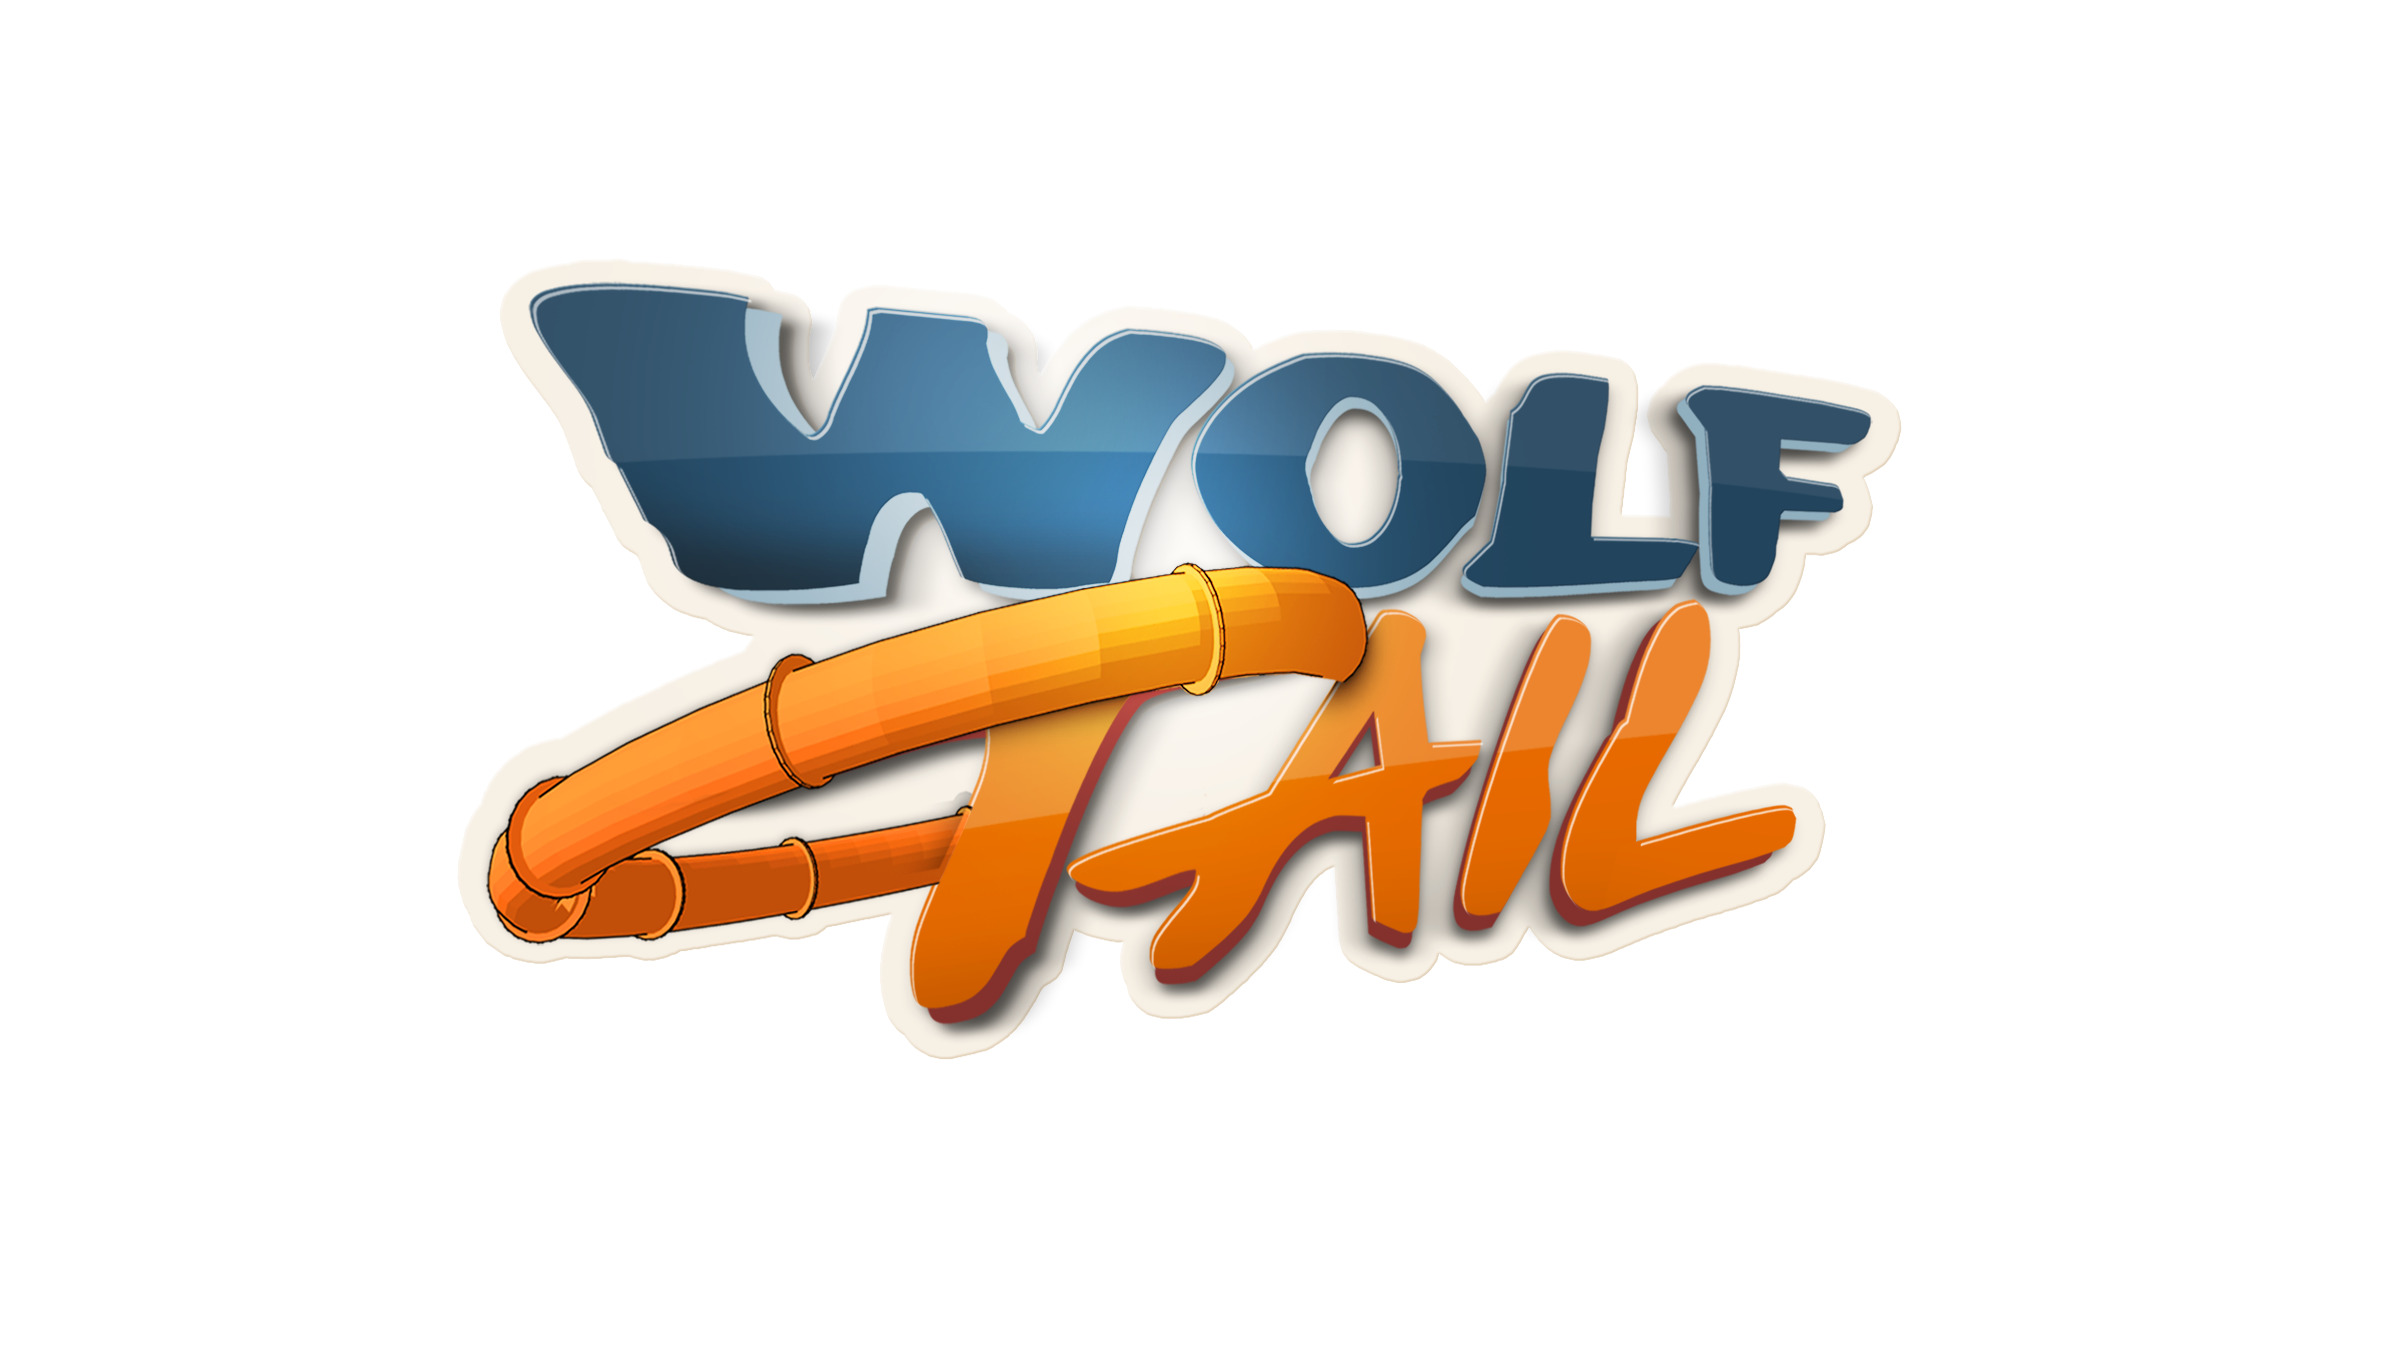 The logo for Wolf Tail